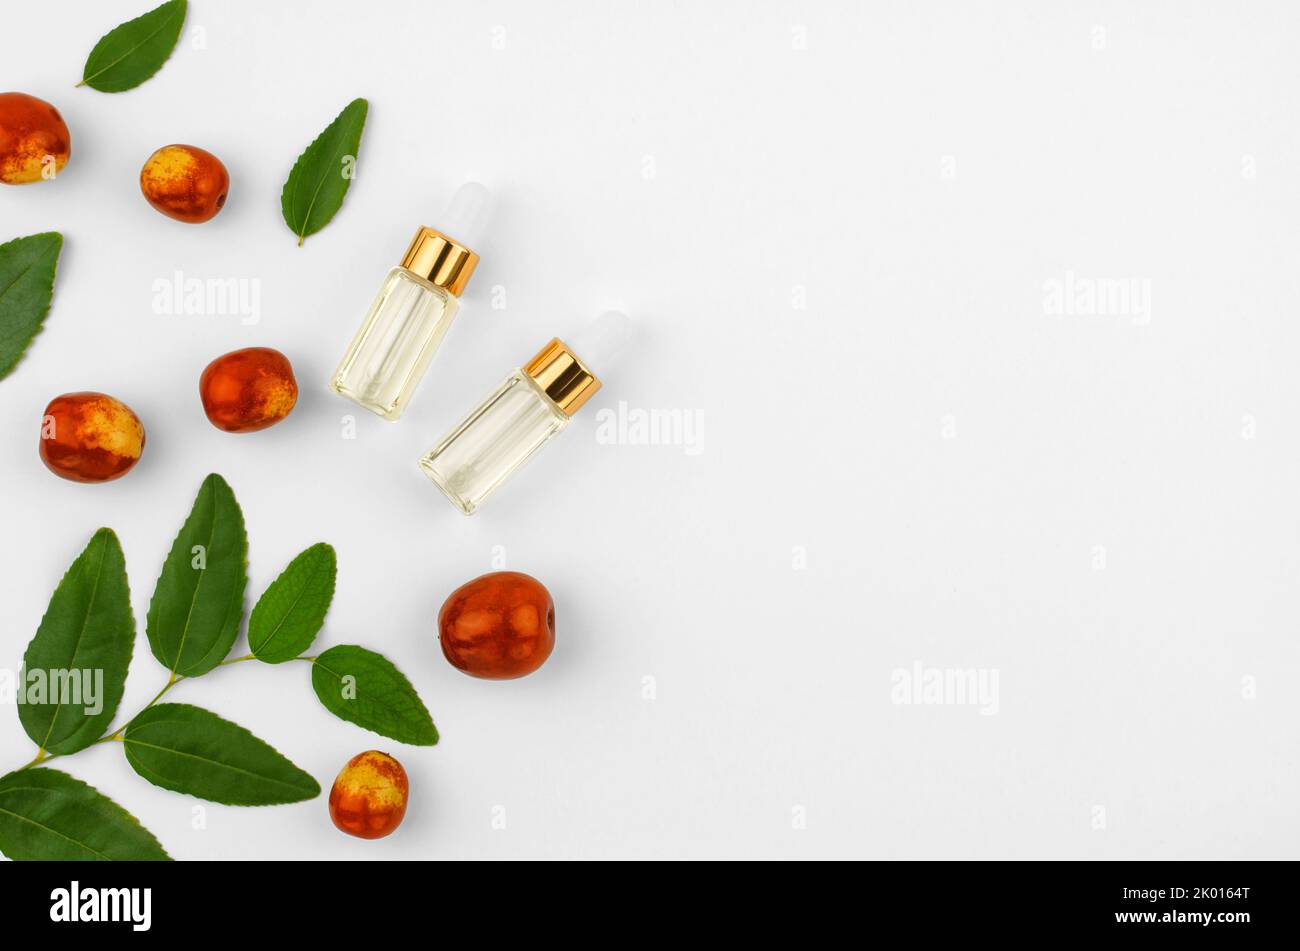 Chinese date fruit and butter, copy space. Jojoba oil in a transparent bottle with a dropper and fresh jojoba fruit on a white background Stock Photo